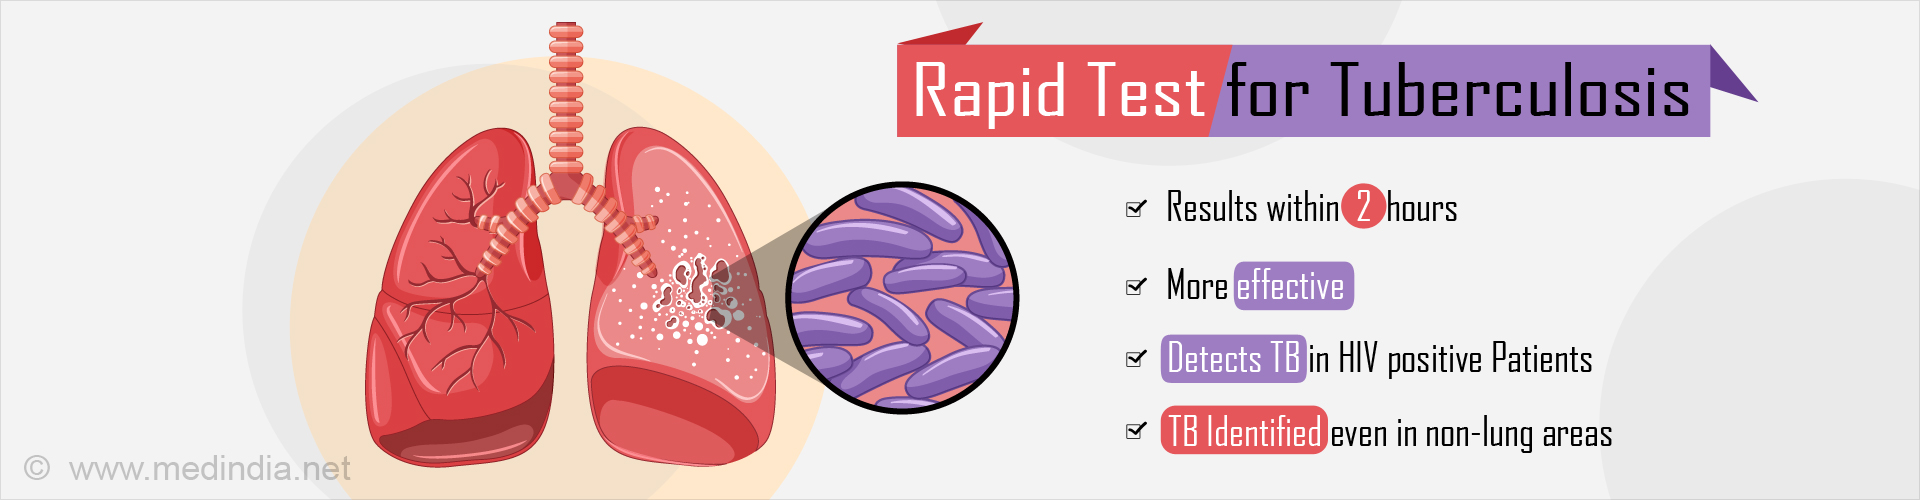 Rapid Test for Tuberculosis
- Results within 2 hours
- More effective
- Detects TB in HIV +ve patients
- TB Identified even in non-lung areas